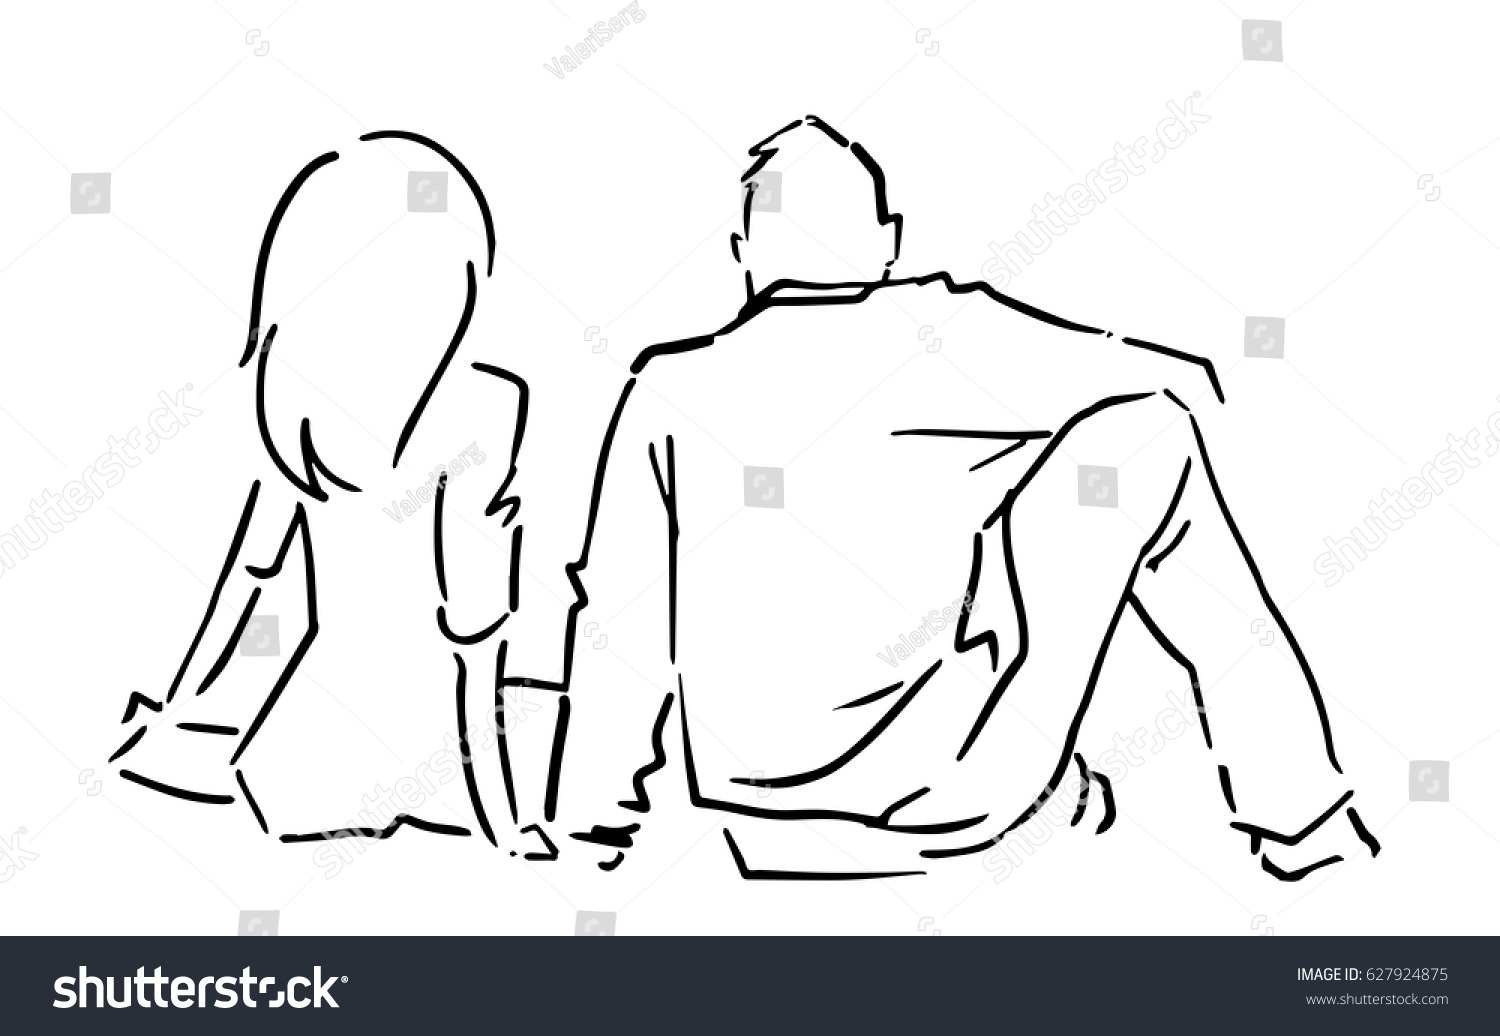 Back Of Person Sitting Drawing Entrepontos